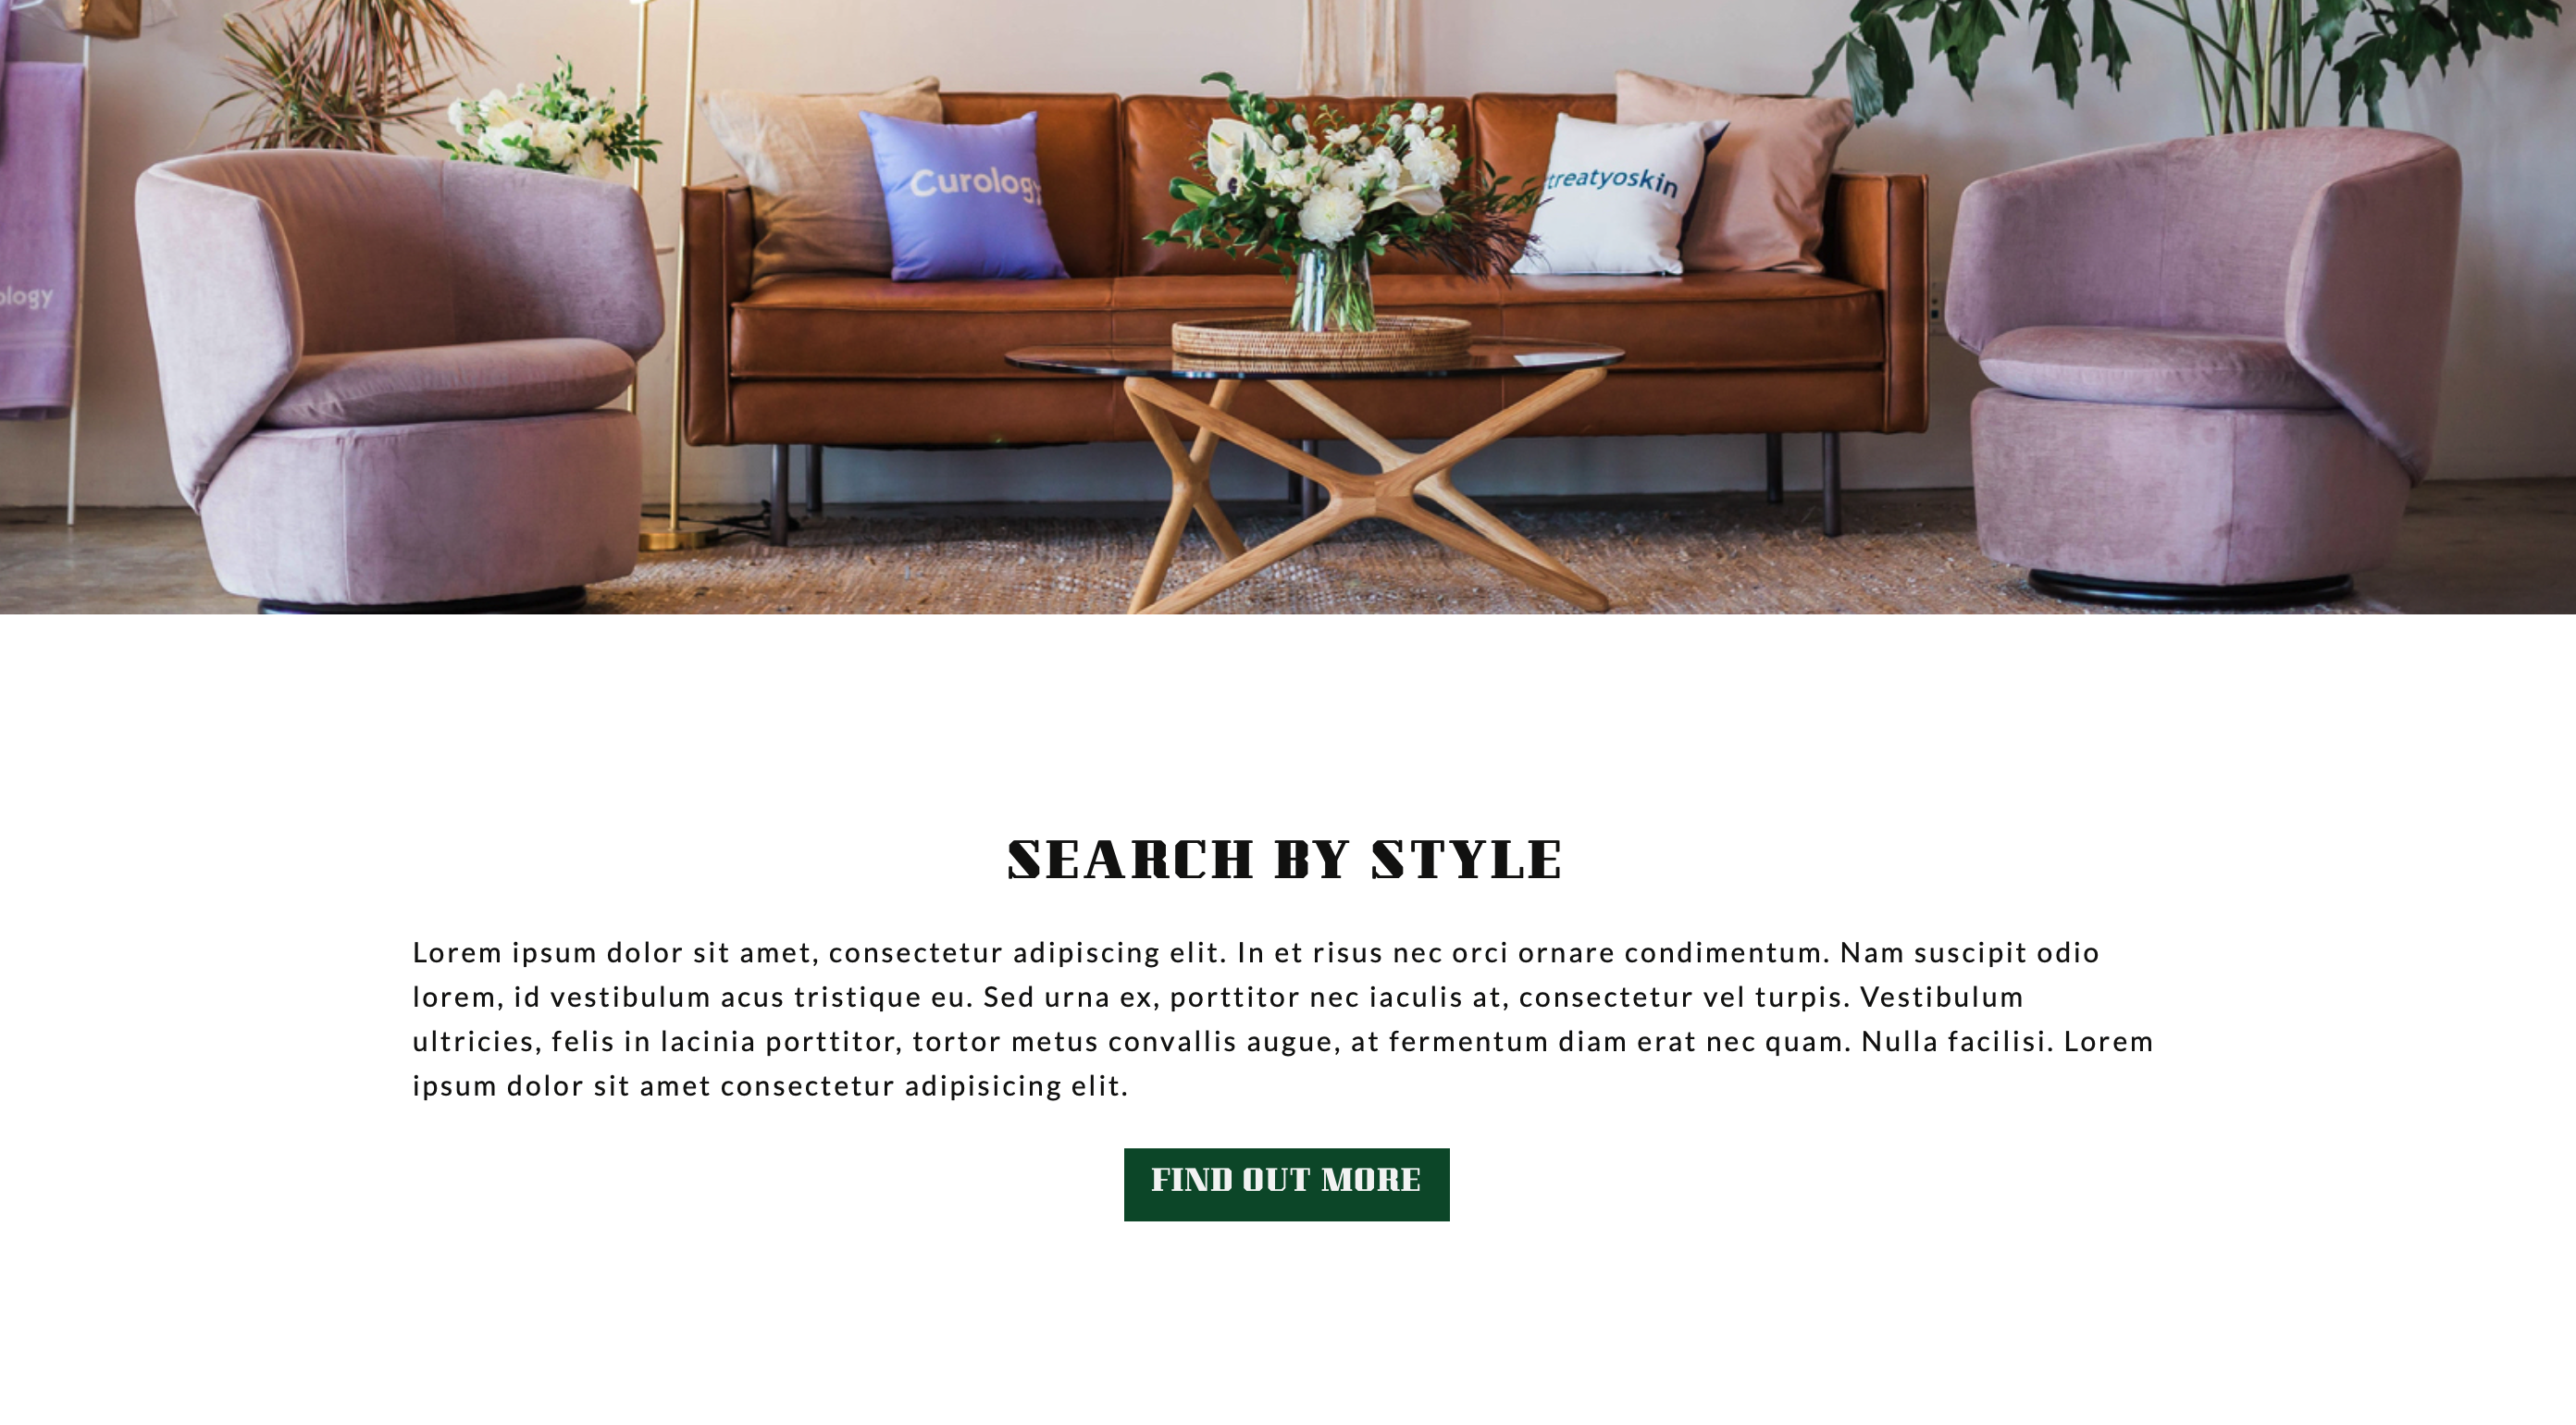 Image of a couch website